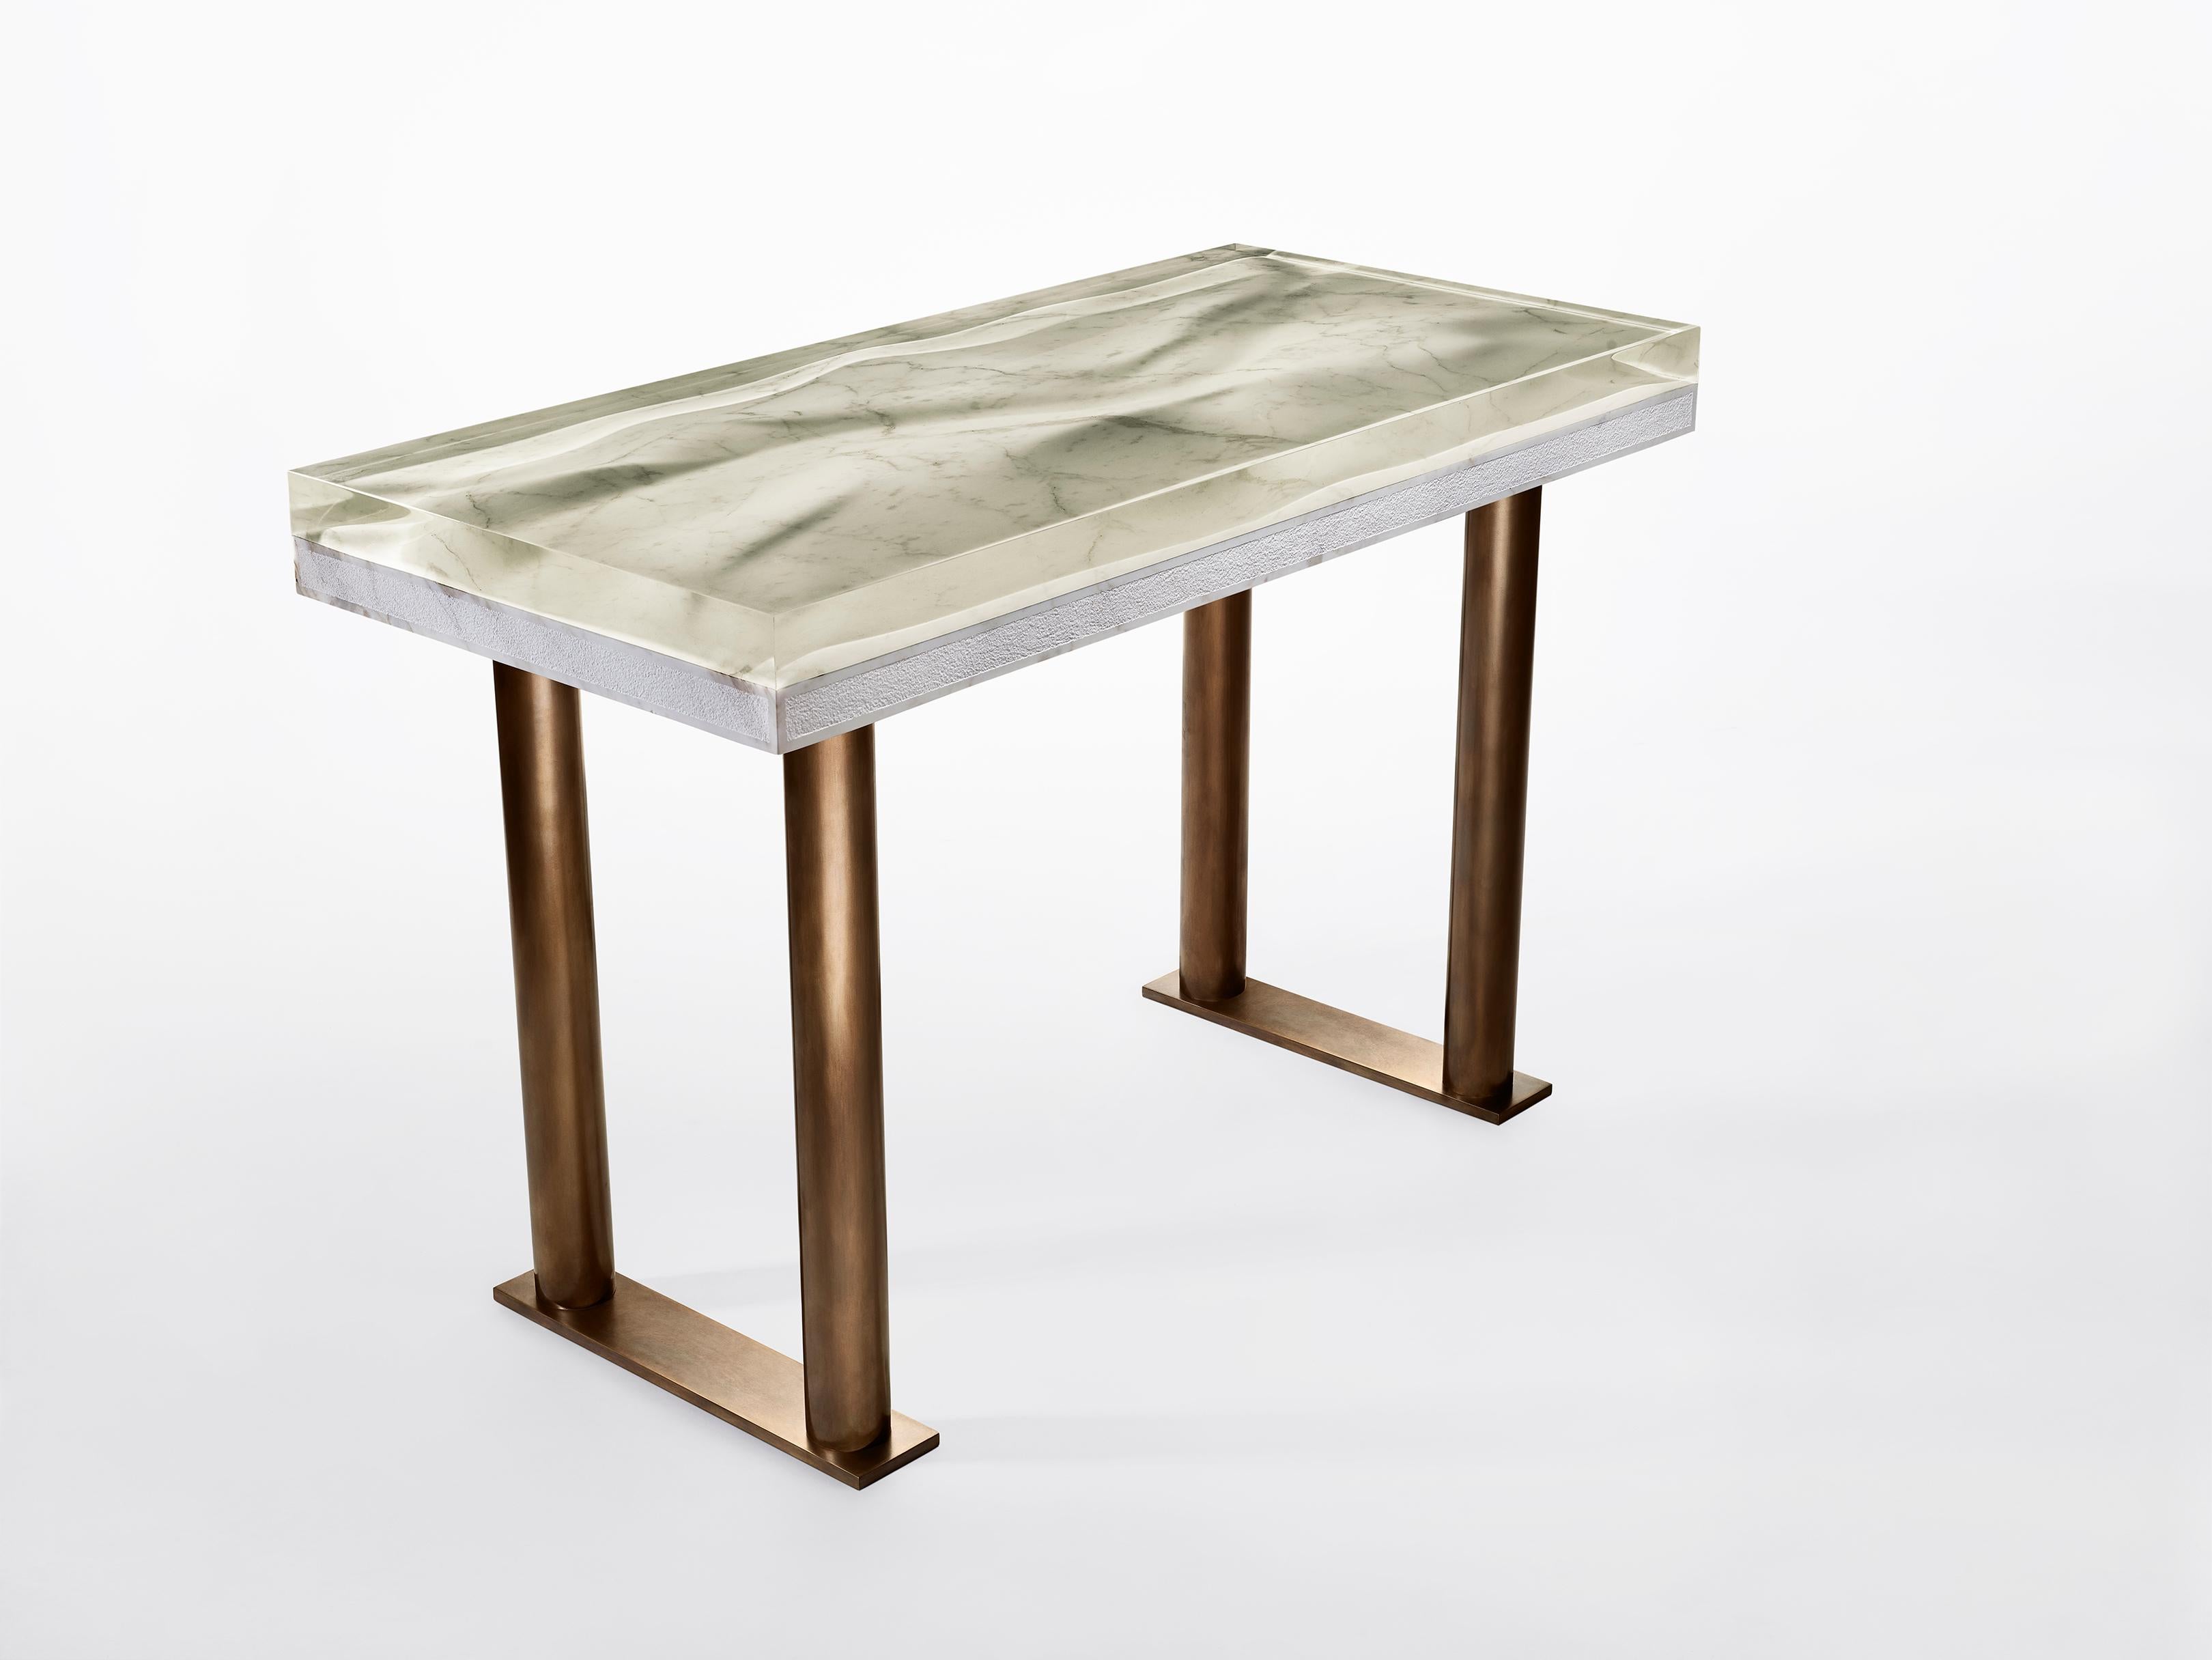 Marble desk by Jonathan Hansen
9 Editions + 1 AP
Dimensions: 116.8 x 55.9 x 76.2 cm
Materials: Calacatta marble, architectural bronze, Resin


Series I Captum Biomorfe is a group of nine sculpture works created by New York artist Jonathan